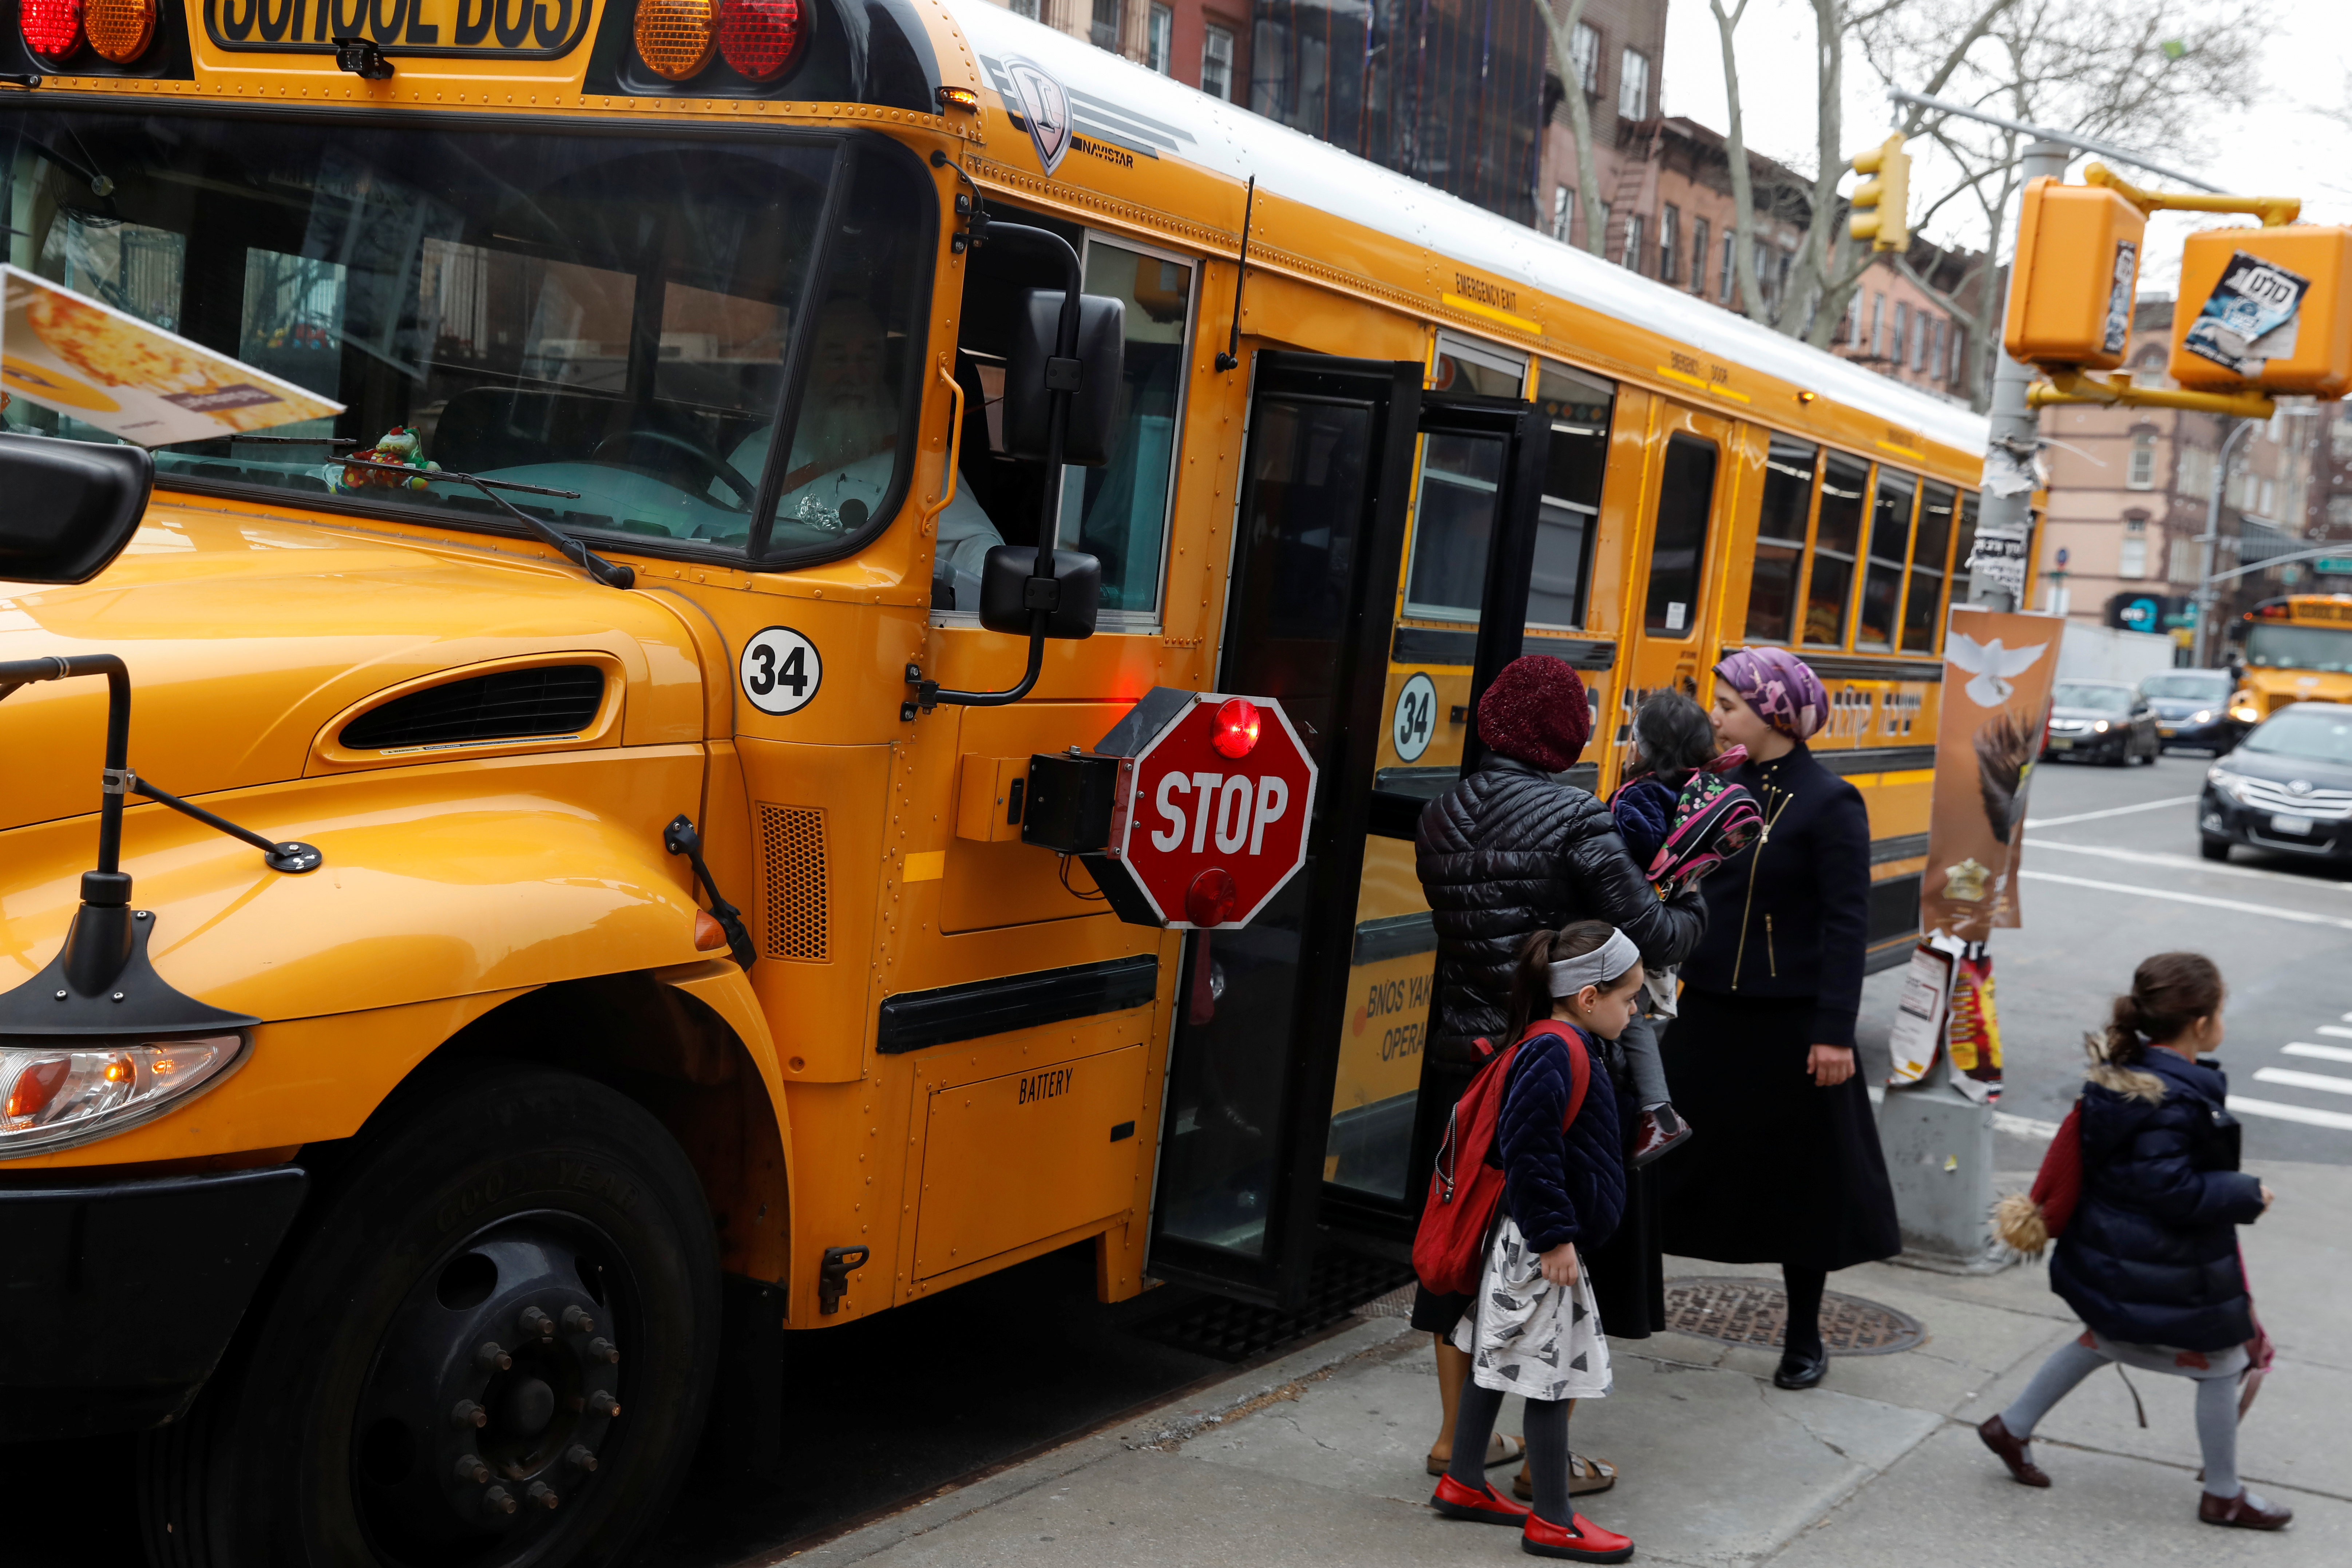 Orthodox Jewish children get off a Yeshiva school bus, as New York City Mayor Bill de Blasio declared a public health emergency in parts of Brooklyn in response to a measles outbreak, in the Williamsburg neighborhood of Brooklyn in New York City, U.S., April 9, 2019. REUTERS/Shannon Stapleton